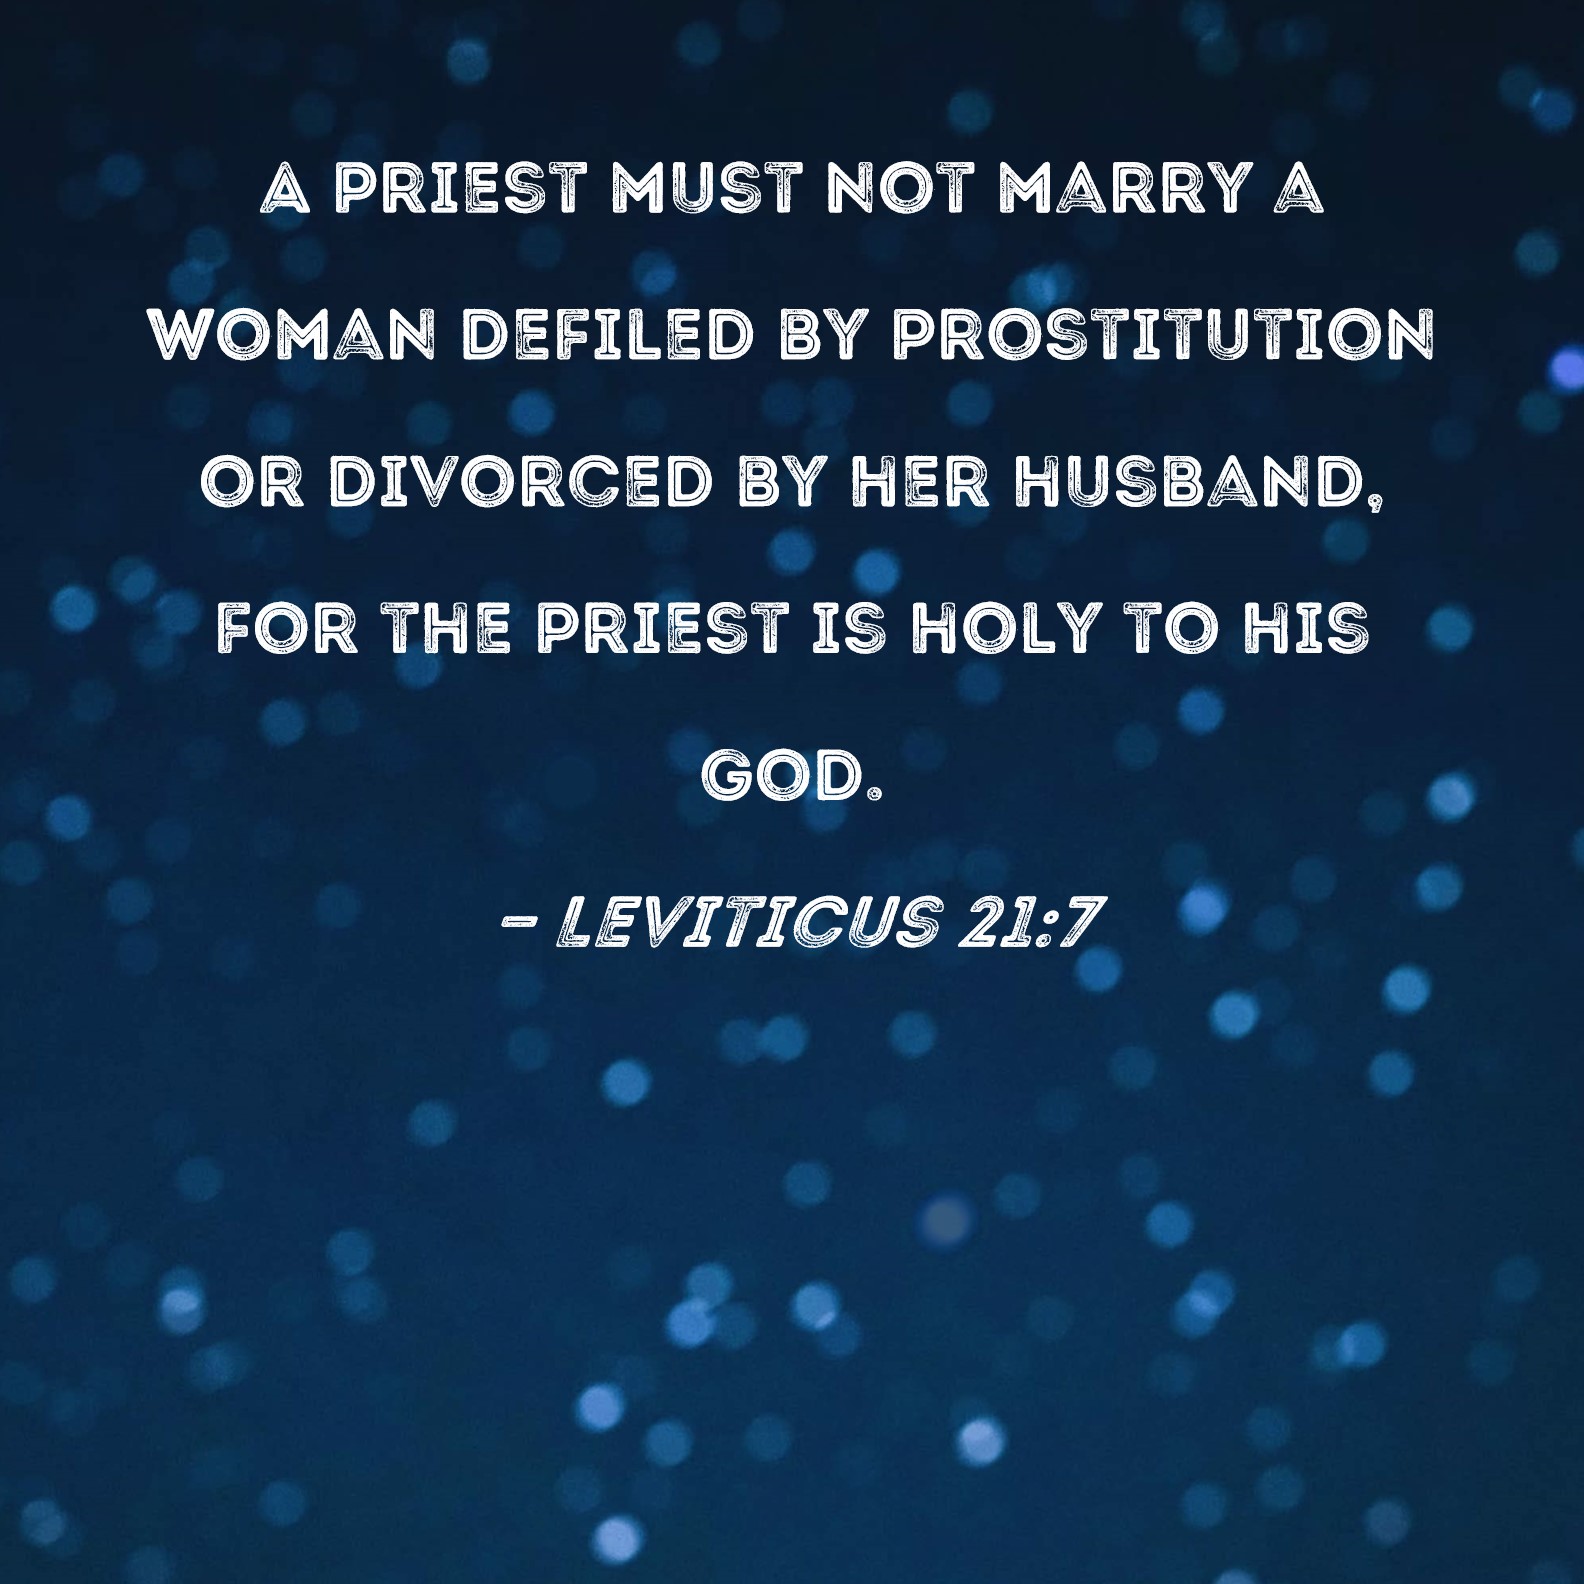 Leviticus 217 A priest must not marry a woman defiled by prostitution or divorced by her husband, for the priest is holy to his God. picture